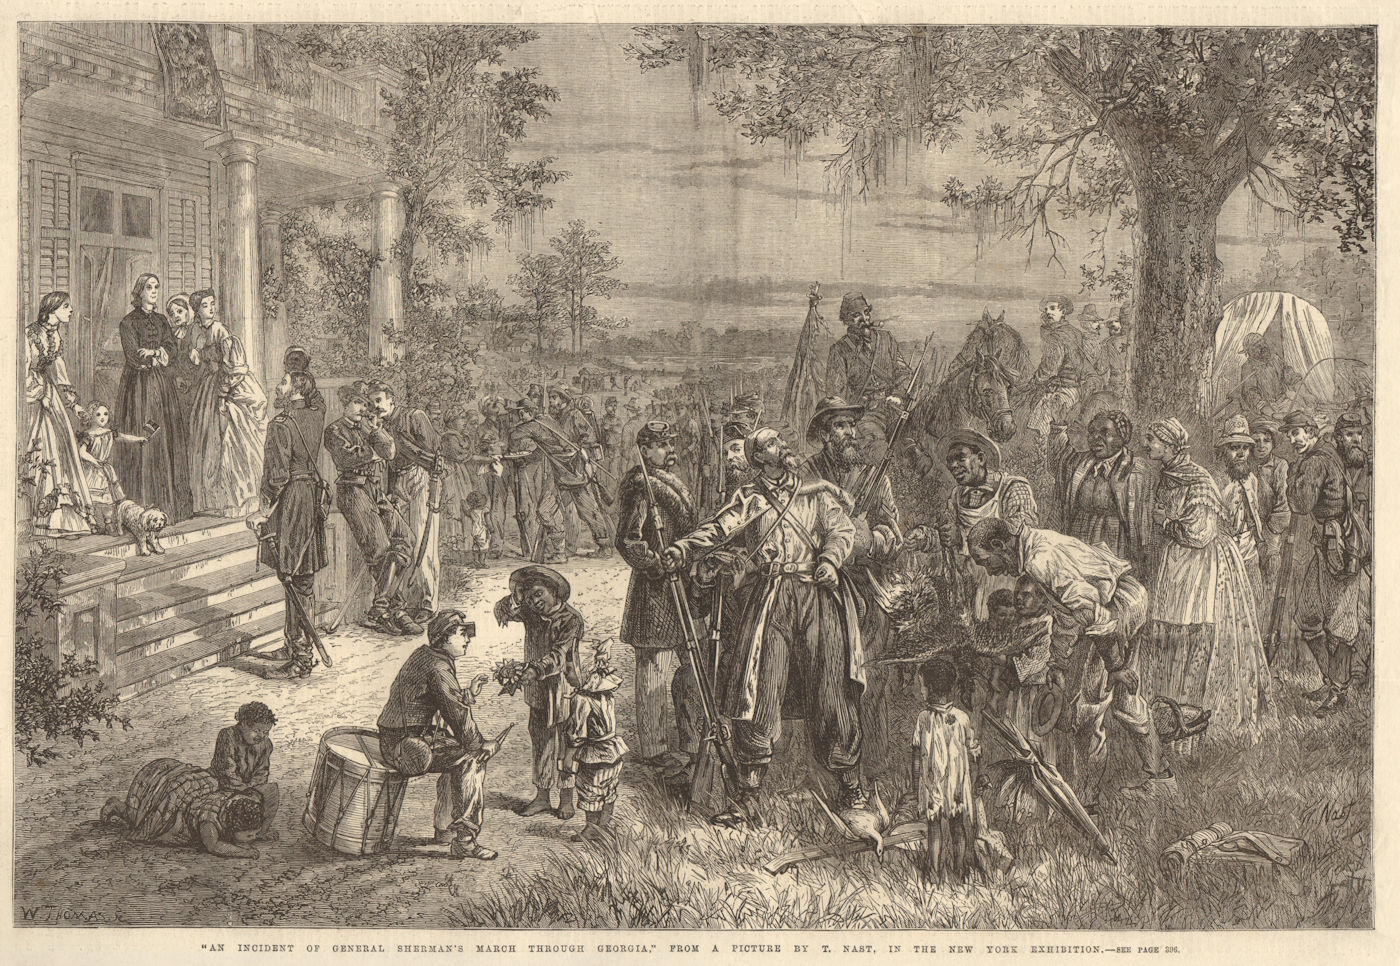 Associate Product "An incident of General Sherman's march through Georgia", by T. Nast 1866